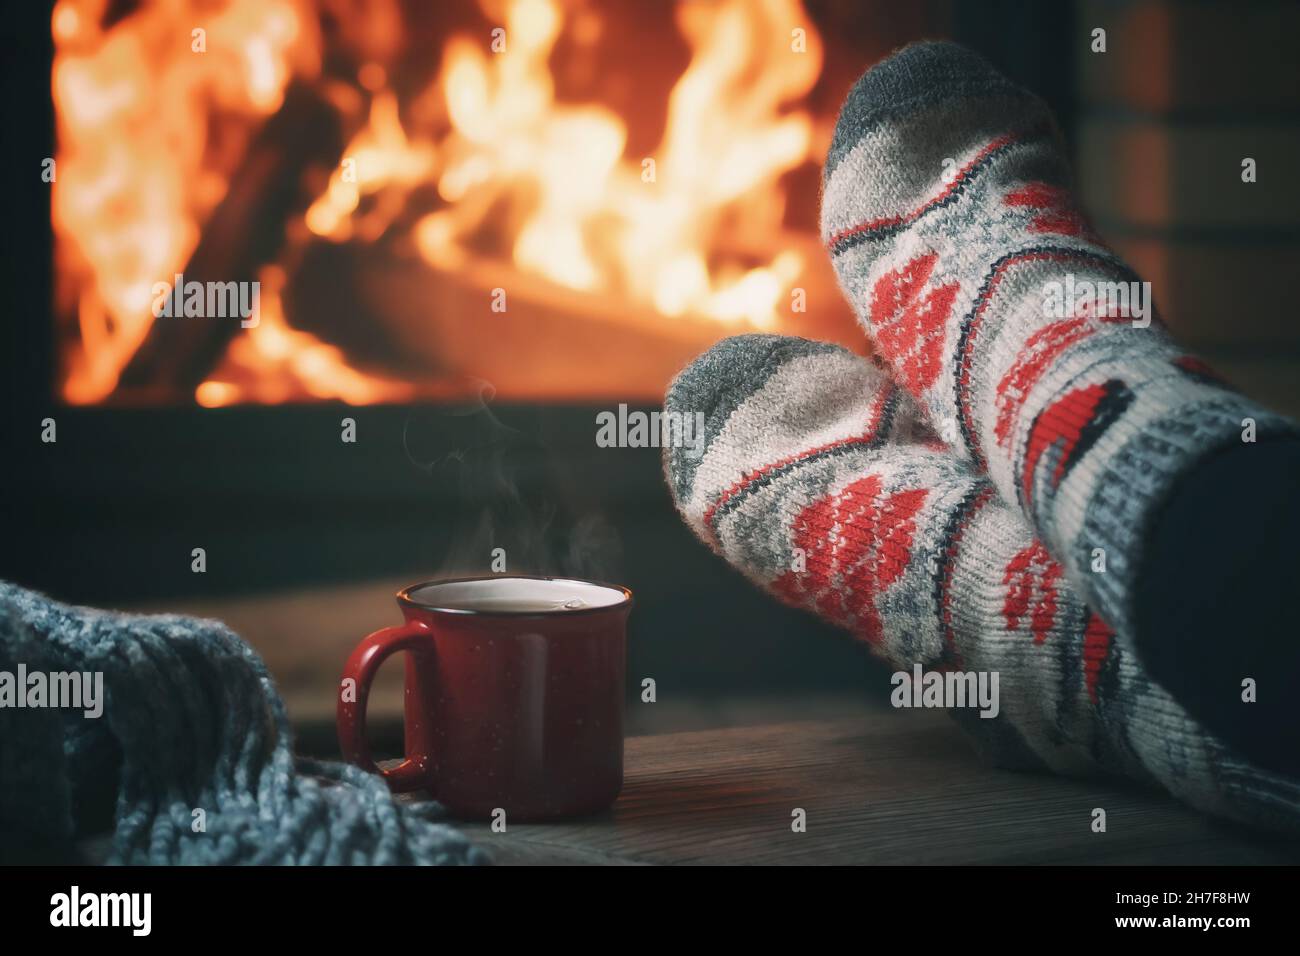 Girl resting and warming her feet by a burning fireplace in a country house on a winter evening. Stock Photo